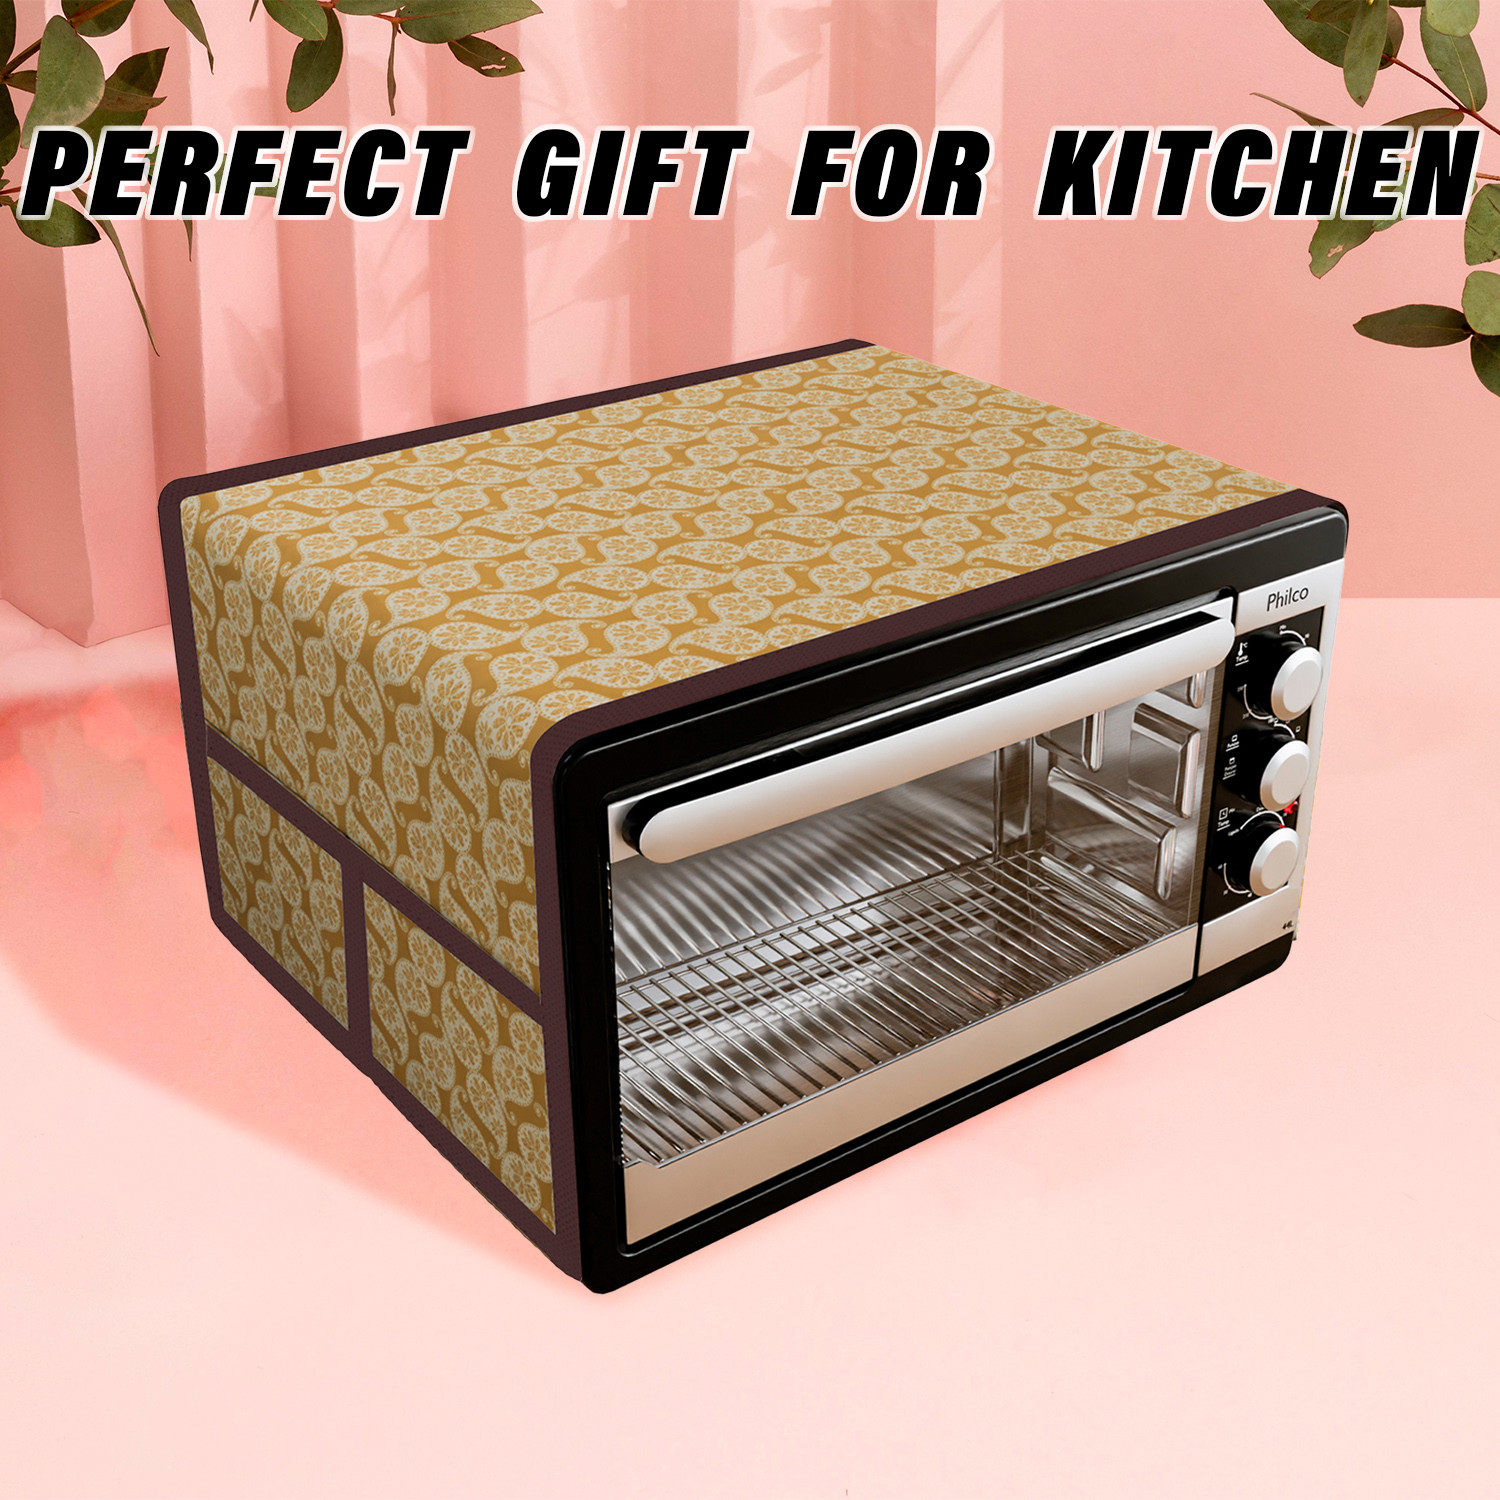 Kuber Industries Oven Top Cover | Microwave Oven Top Cover | Microwave Cover with 4 Utility Pockets | Oven Cover for Kitchen Décor | Carry Design Oven Top Cover | 20 LTR | Golden